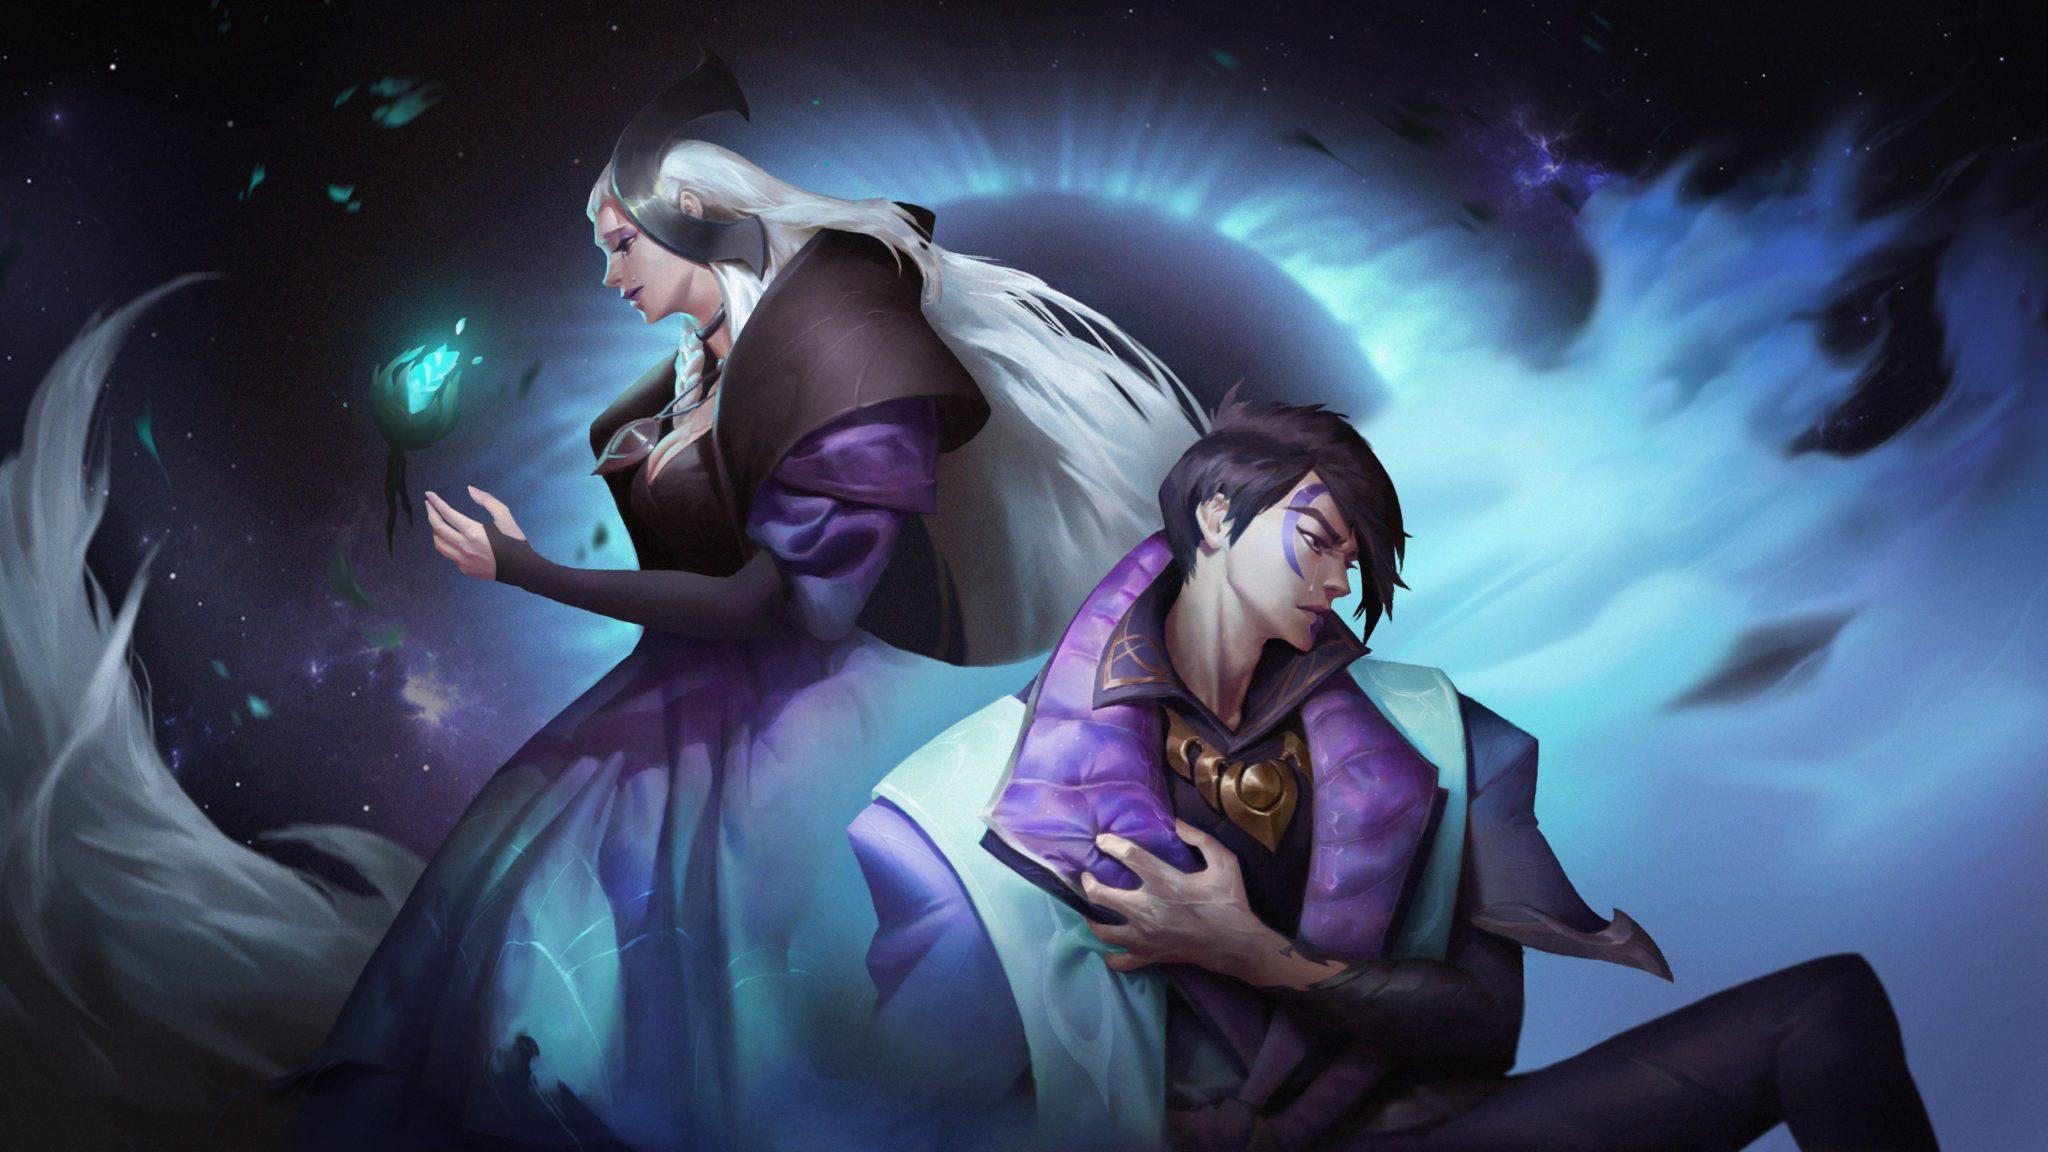 Aphelios and Alune in League of Legends